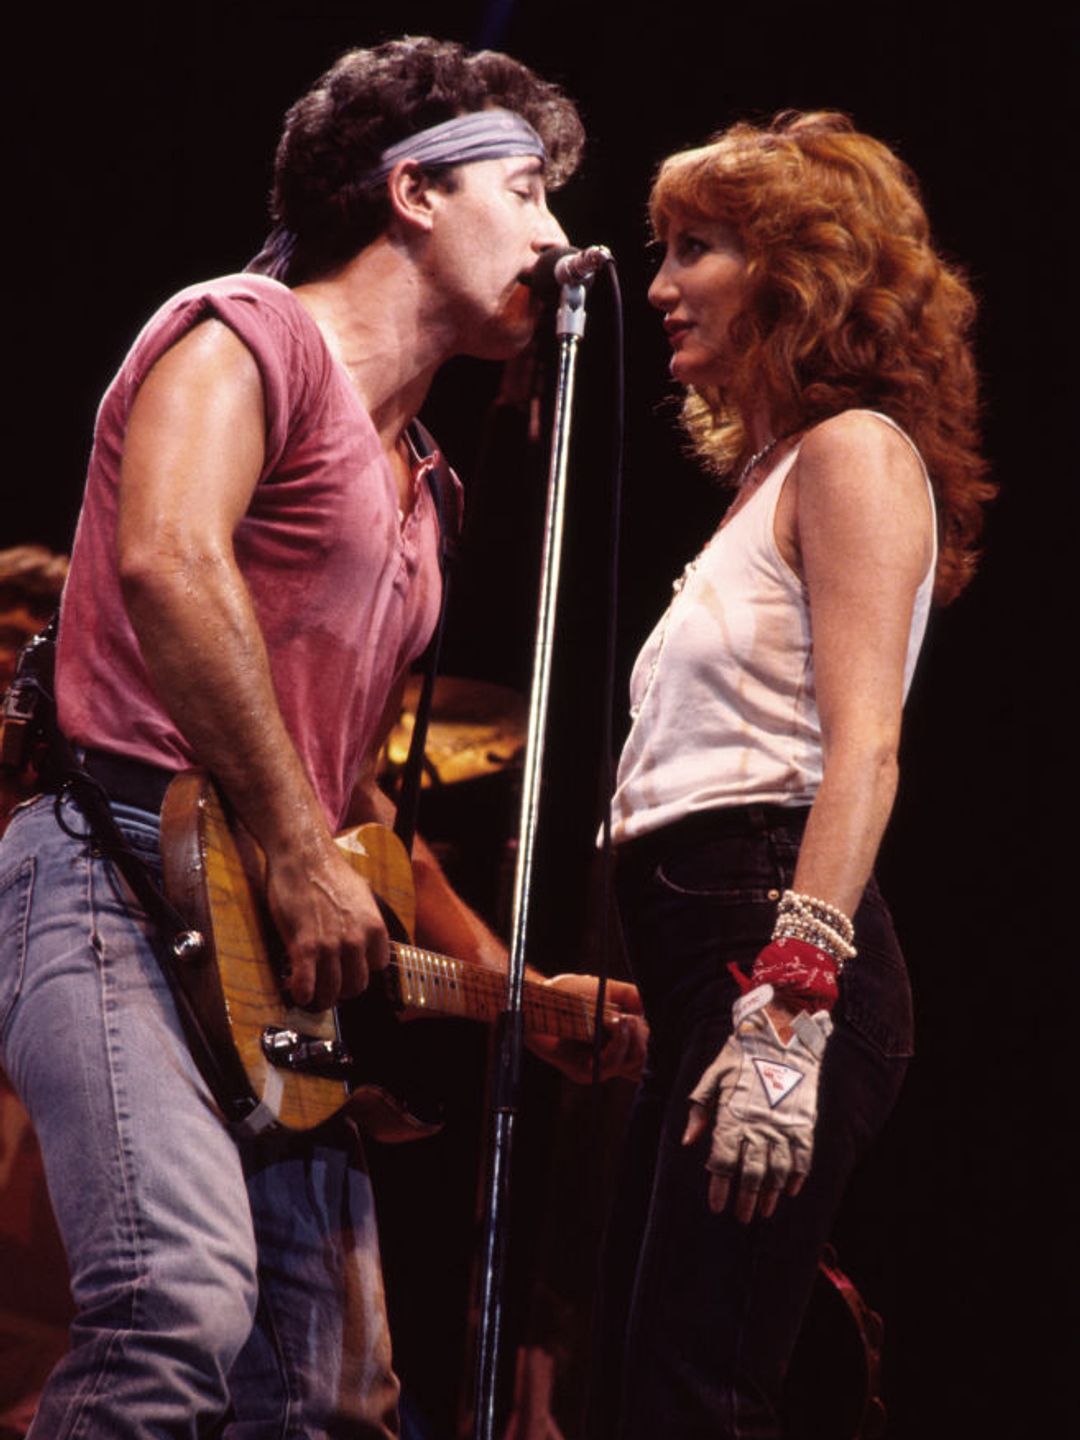 Bruce Springsteen, on guitar, and backing vocalist Patti Scialfa of the E Street Band, perform onstage during the 'Born in the USA' tour in 1985. 